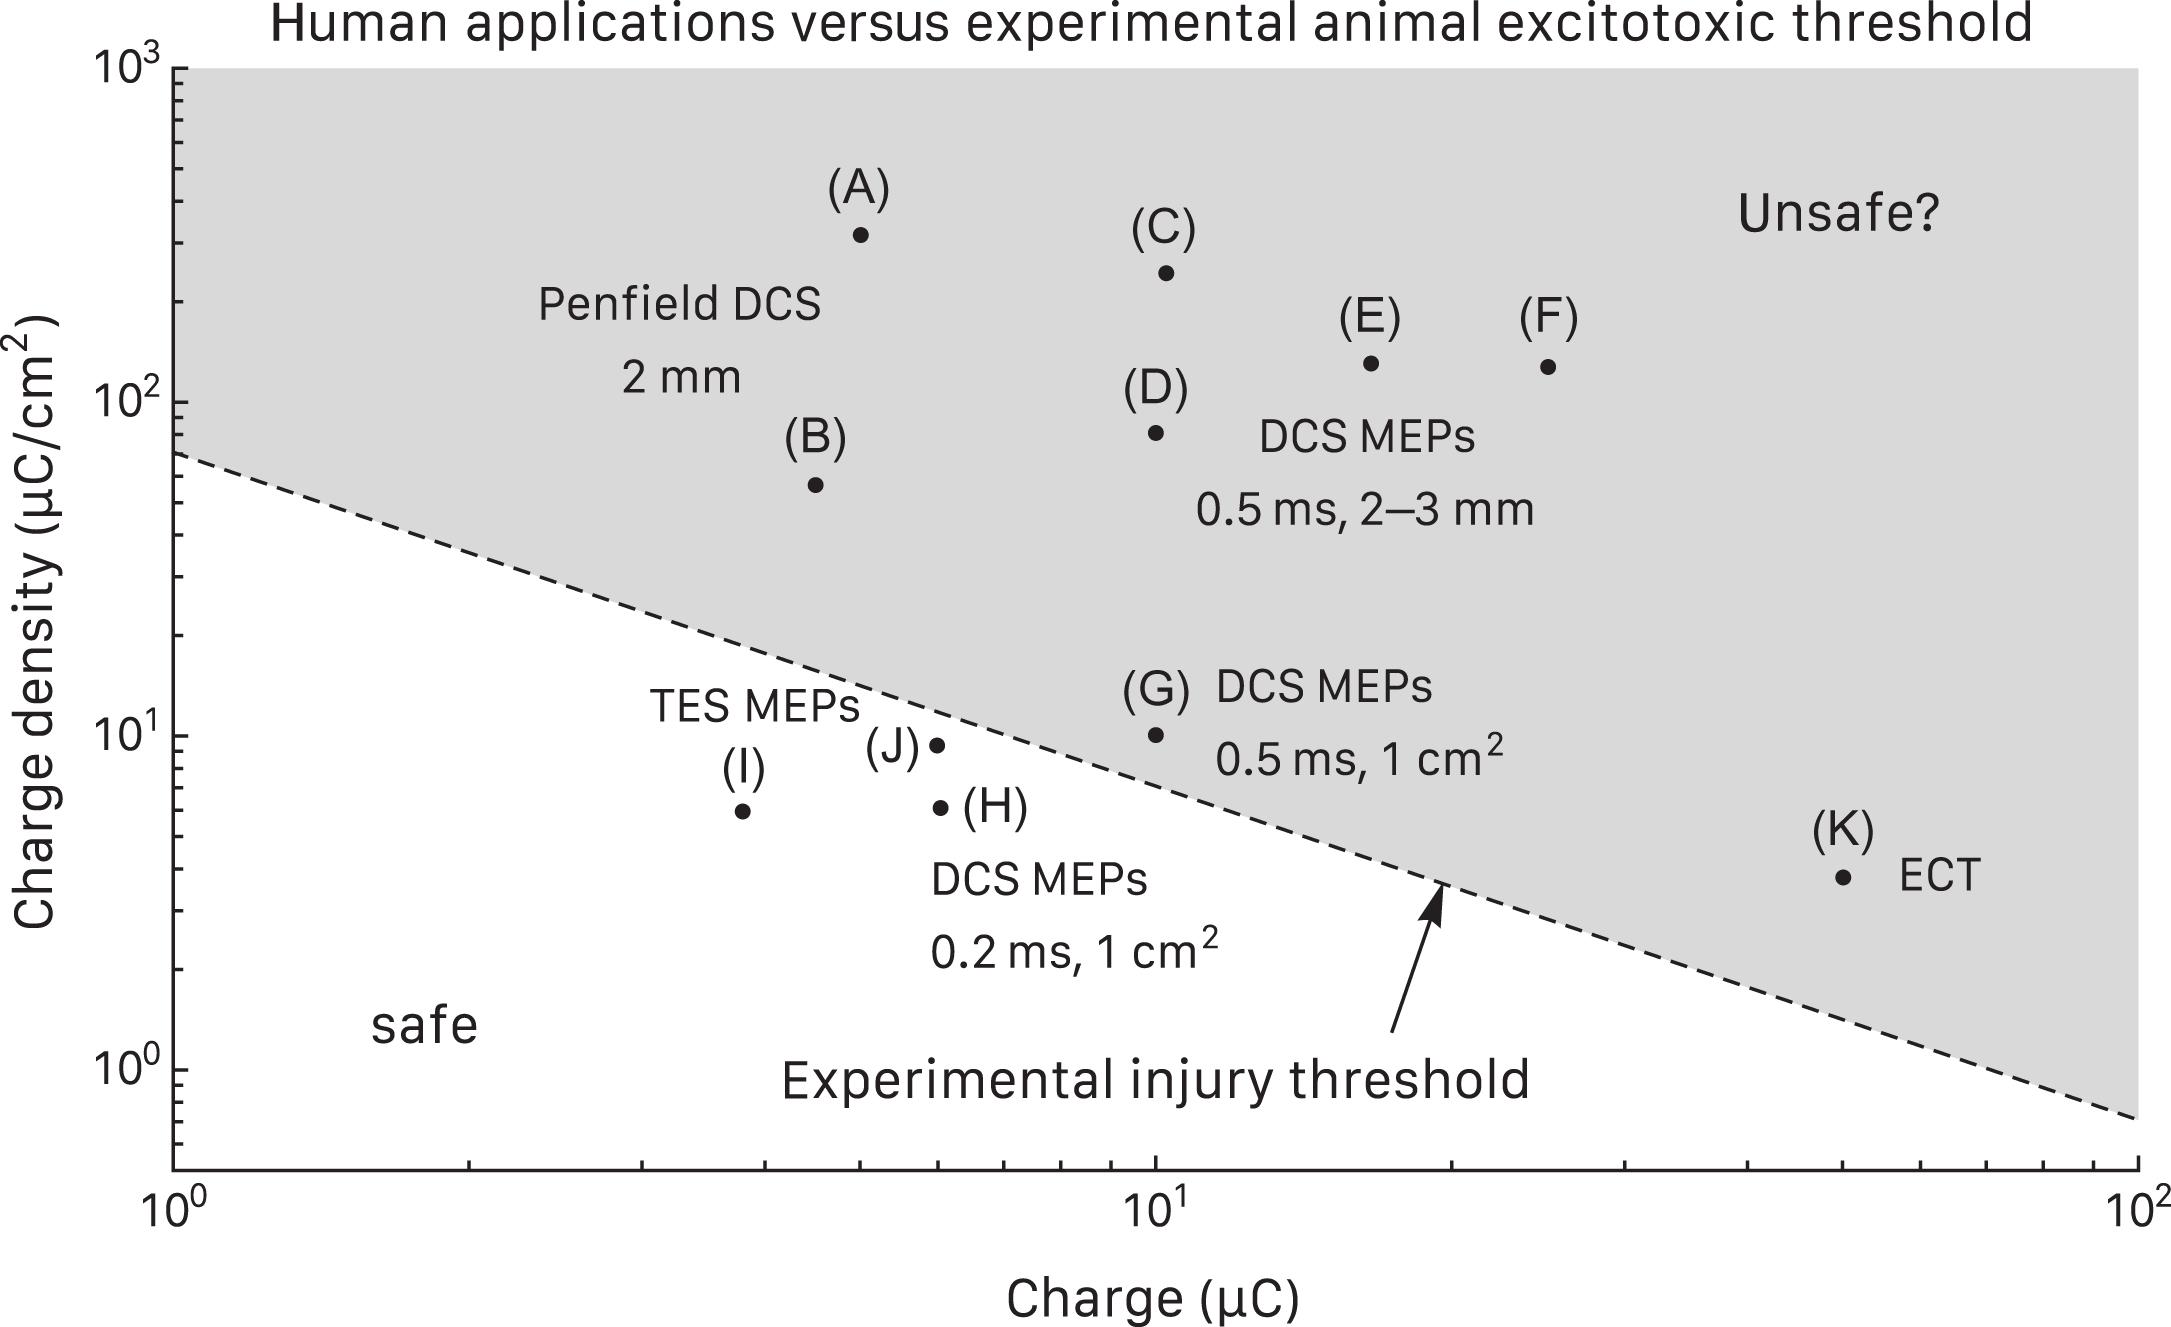 Figure 41.3, Reported maximum charge and charge density in humans compared to the experimental animal excitotoxic threshold, logQD=1.85−logQ logQD=1.85−logQ : (A and B) Penfield DCS with a 2 mm probe. (C–F) DCS MEPs with 0.5 ms pulse duration and 2–3 mm diameter electrodes. (G) DCS MEPs with 0.5 ms pulse duration and a 1 cm 2 electrode. (H) DCS MEPs with 0.2 ms pulse duration and a 1 cm 2 electrode. (I and J) TES MEPs. (K) ECT. DCS , Direct cortical stimulation; ECT , electroconvulsive therapy; MEPs , motor evoked potentials; TES , transcranial electric stimulation.